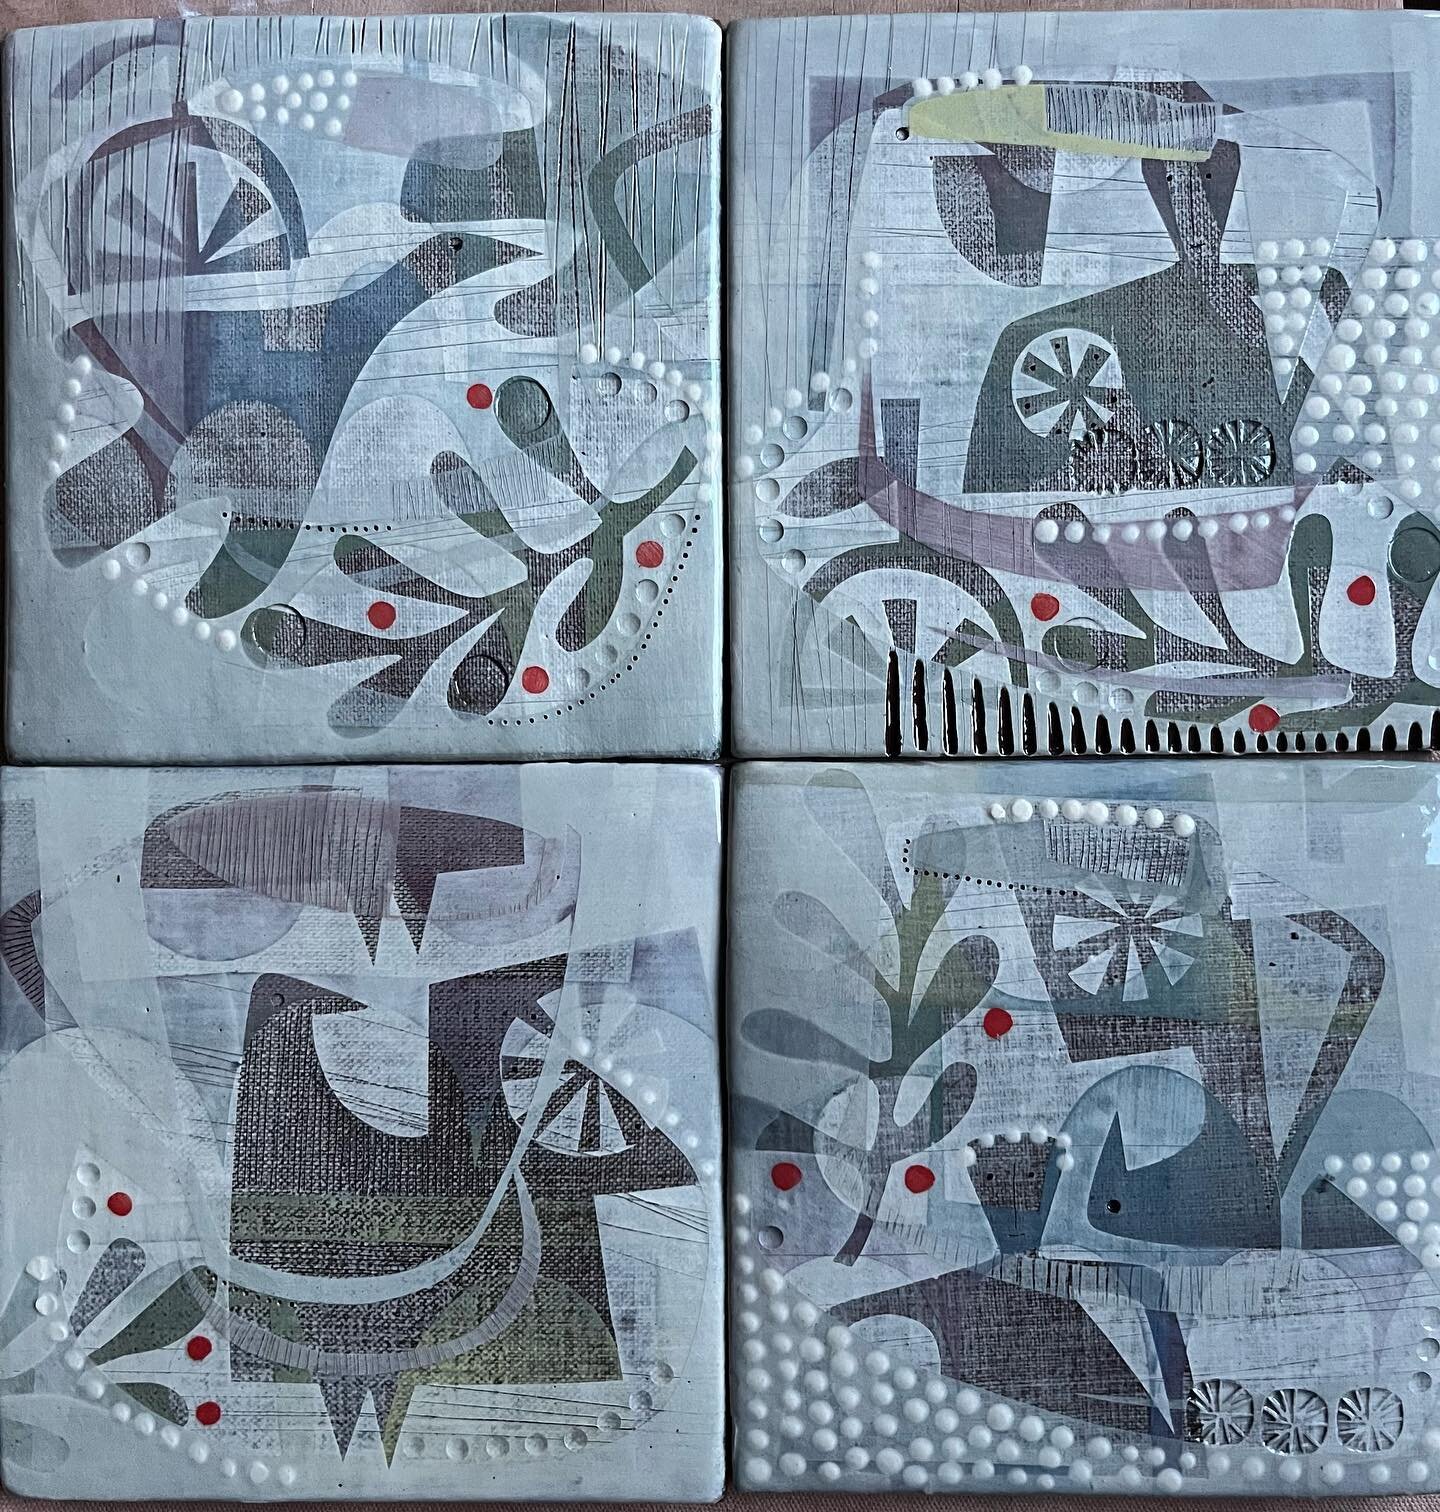 I like the &lsquo;wintery&rsquo; colours of these tiles fresh out the kiln. 

#ceramictiles 
#handmadetiles 
#pottery
#ceramics
#midcenturymodern 
#folkart
#illustration